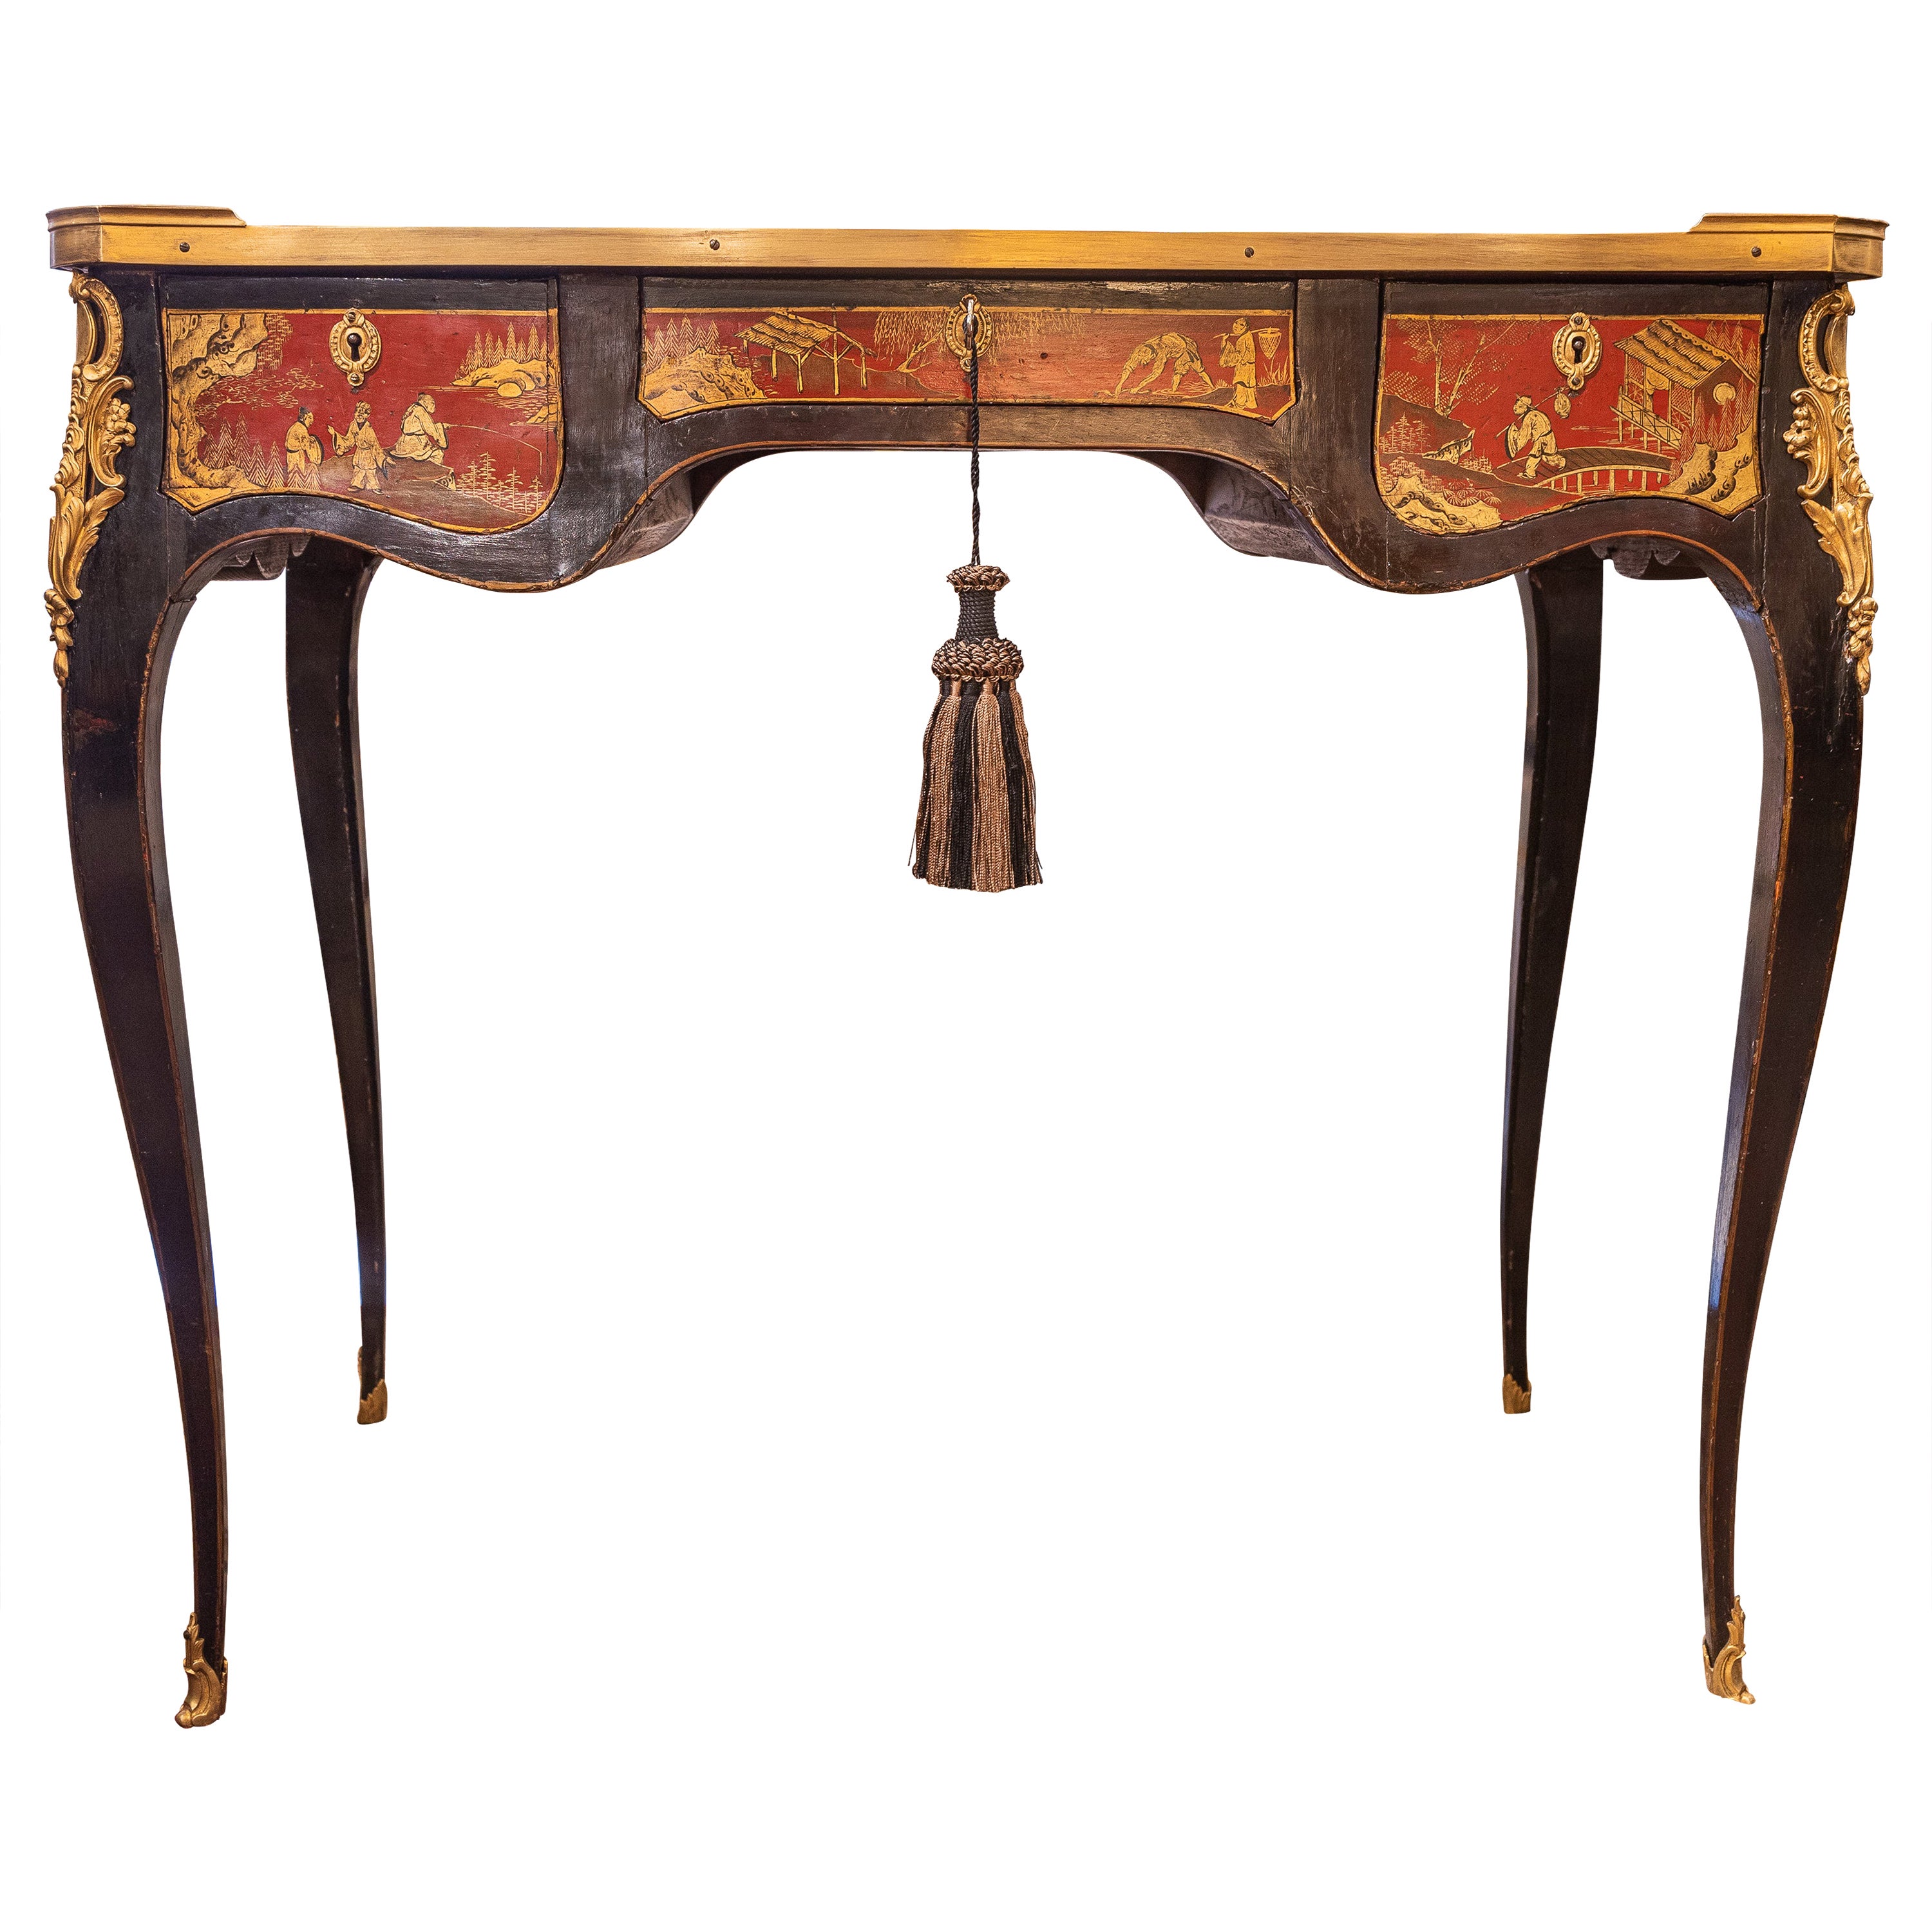 A fine 19th c French red lacquered Chinoiserie inspired writing desk